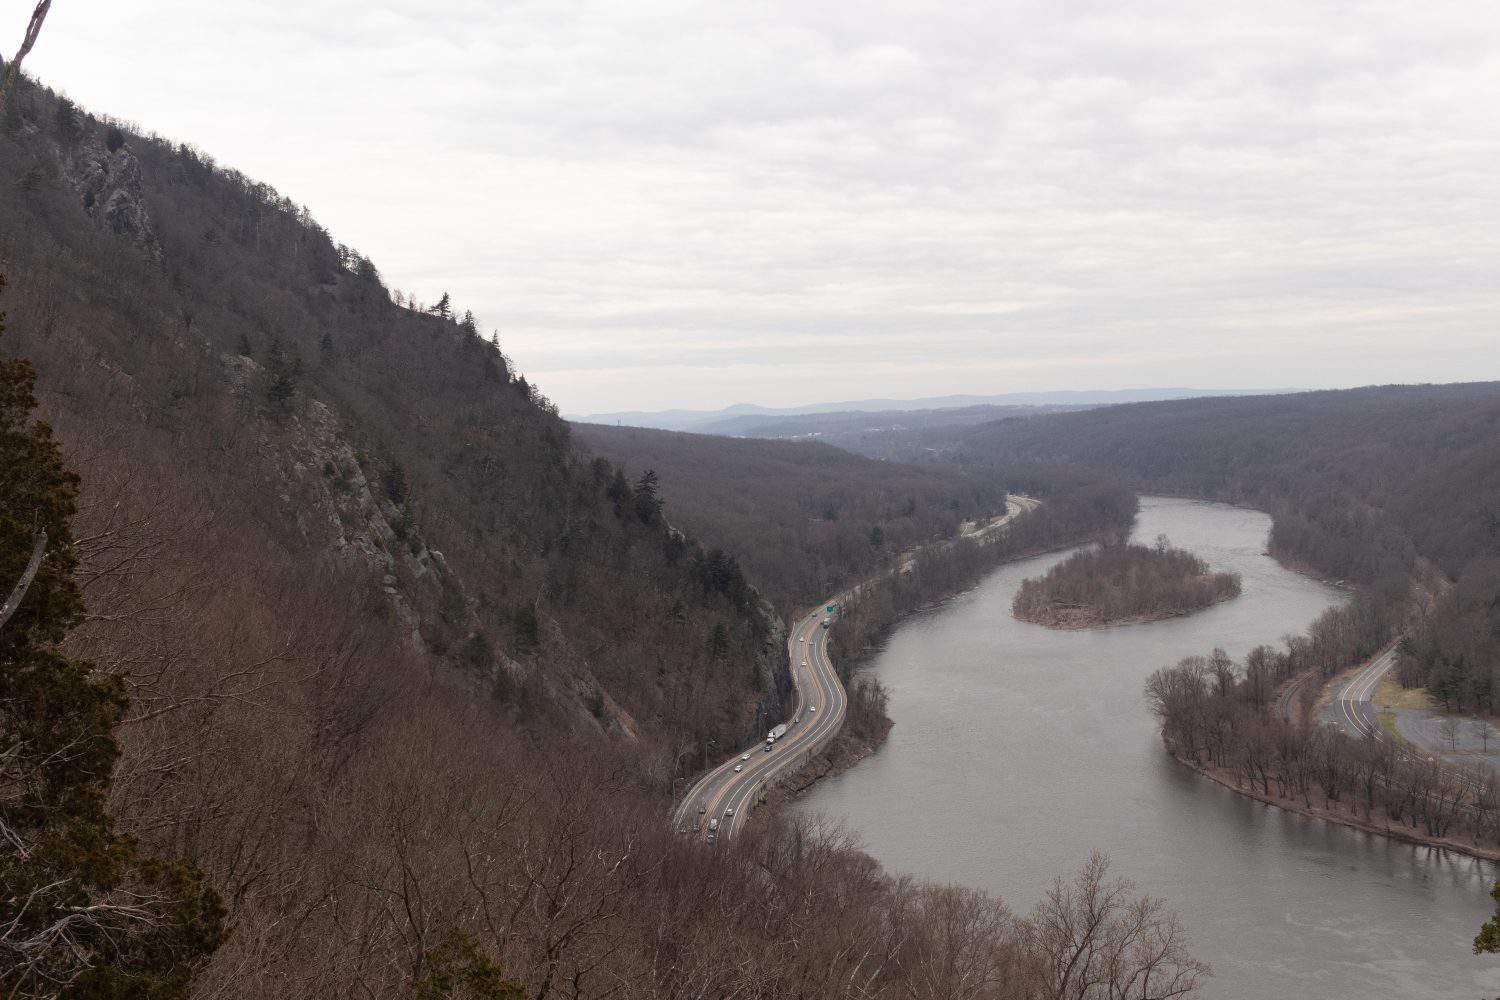 This is a picture taken at the Delaware Water Gap National Recreation Area. This is where the Delaware snakes in between New Jersey and Pennsylvania running through the Kittatinny ridge.